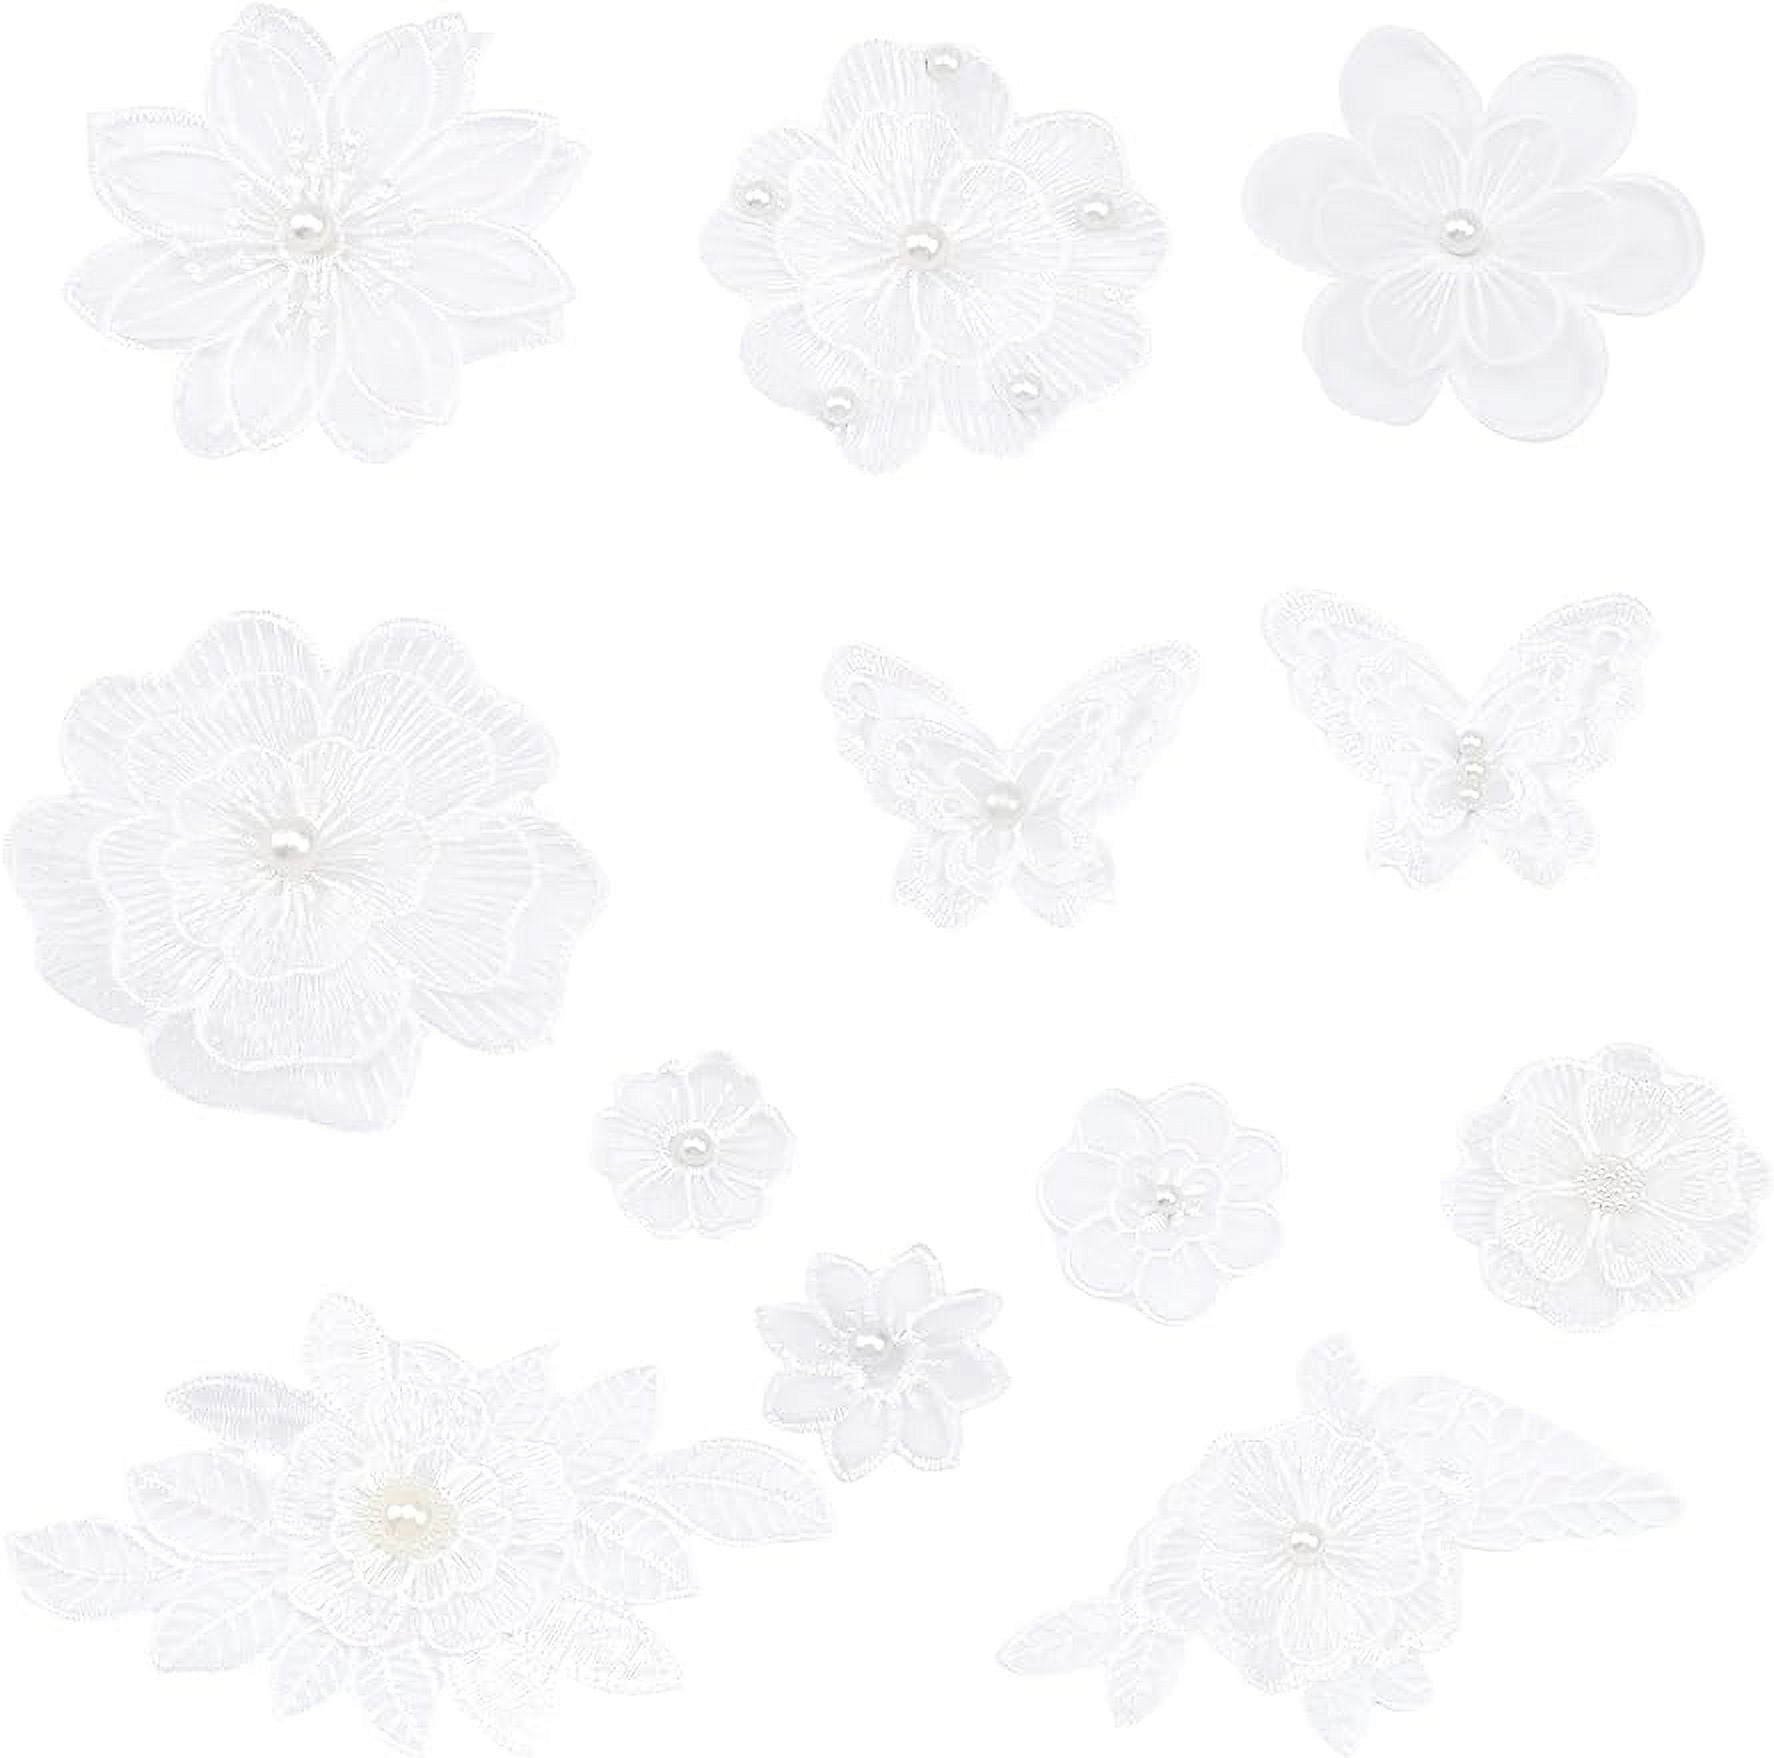 HINZIC 20pcs Mini Flower Iron On Patches 17 Patterns Decorative Embroidered  Patches Floral Sewing Appliques Valentines for Jeans, Clothing, Jacket